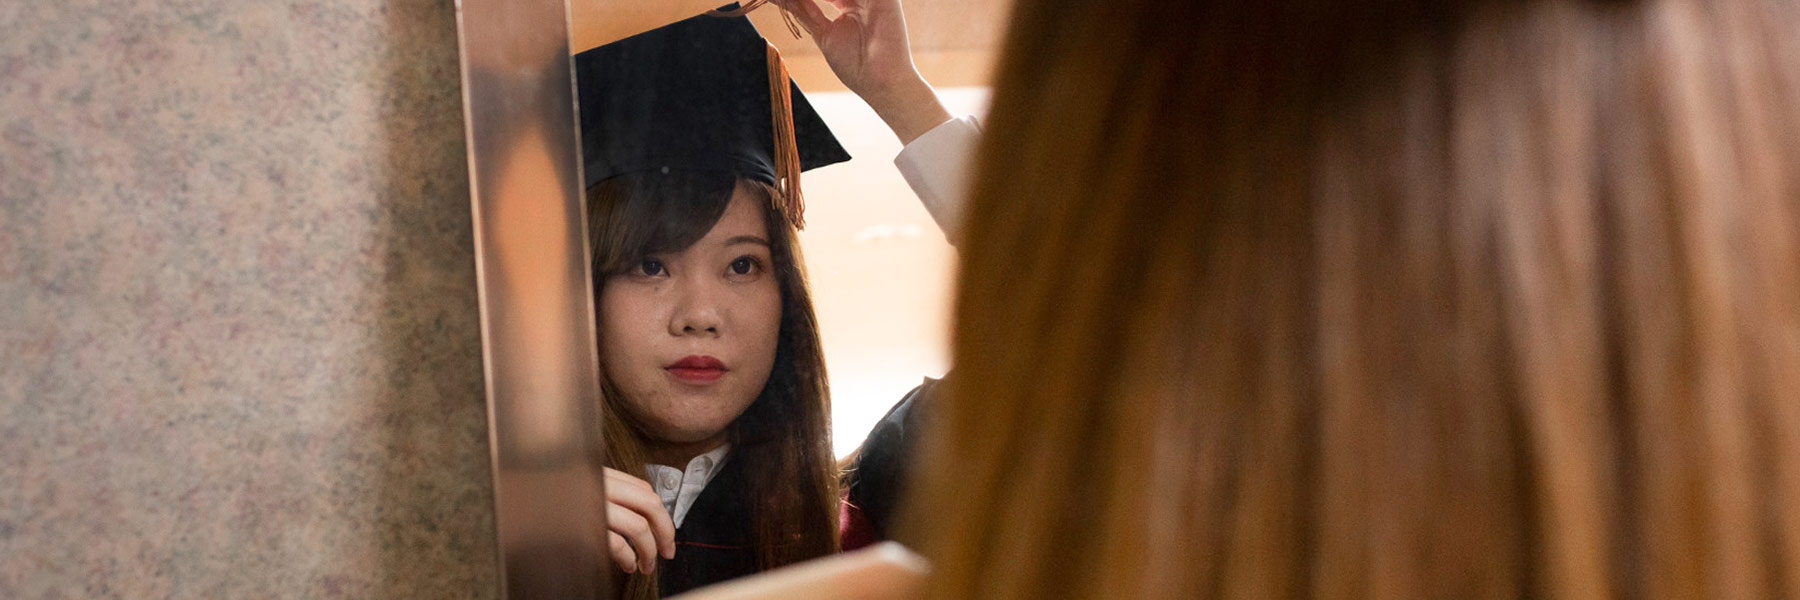 A young woman adjusts her mortarboard cap in a mirror at GradFair